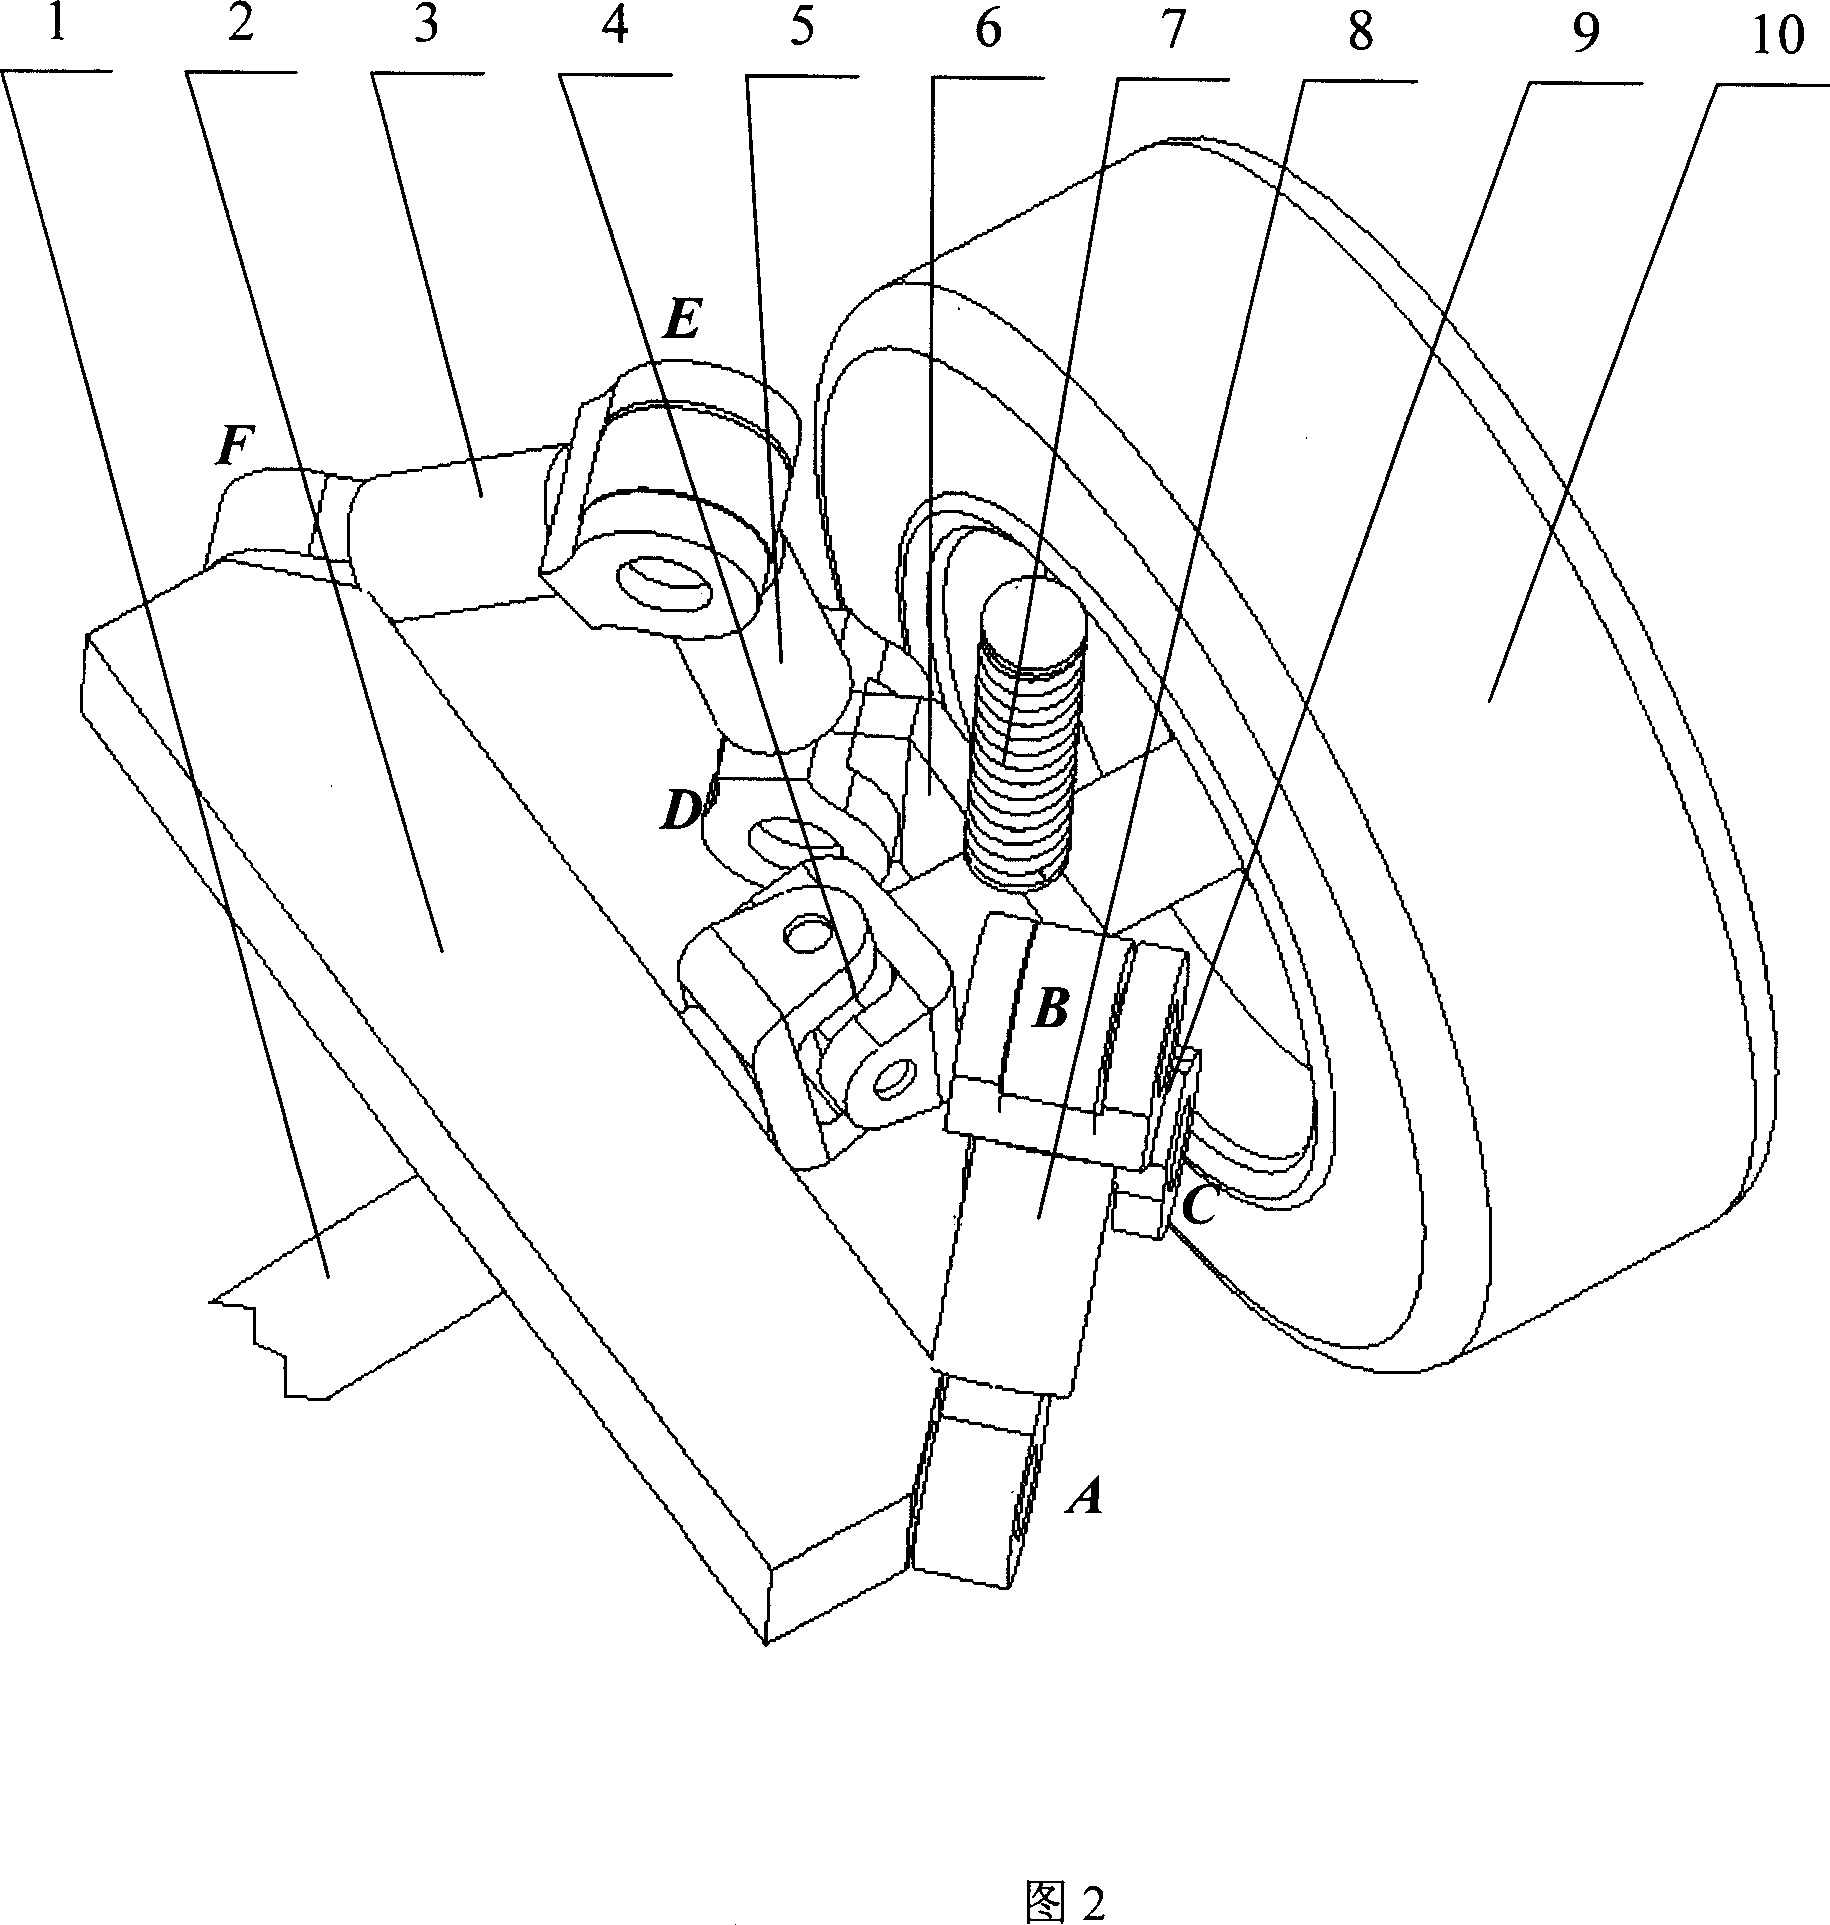 Vertical translation type spacing multi-connecting-rod separated suspension